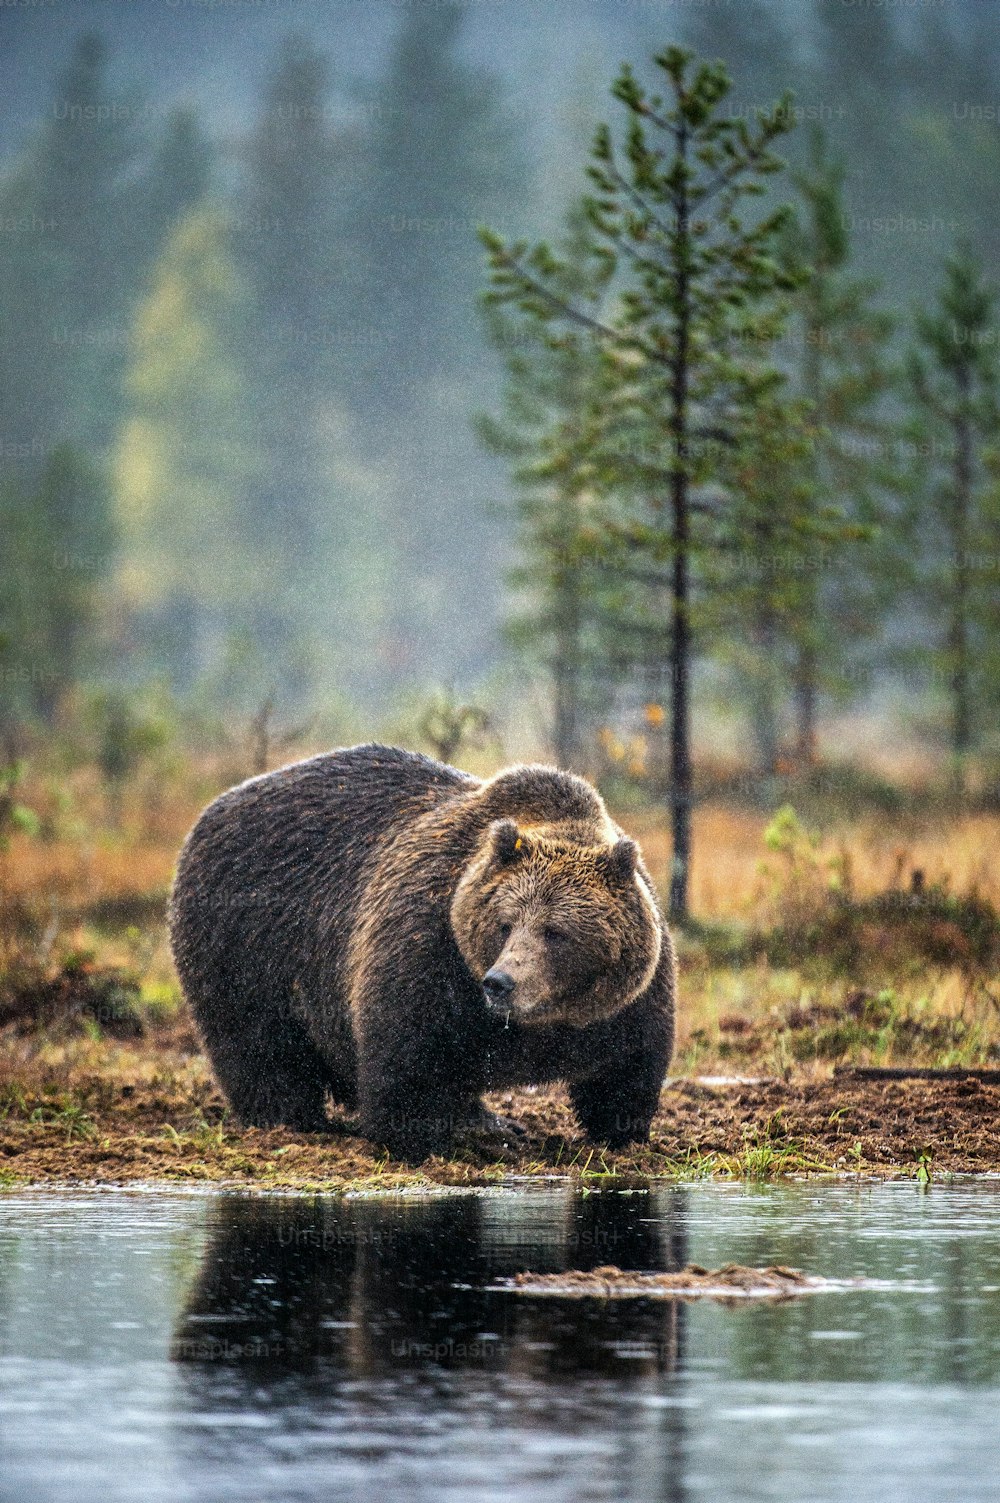 A brown bear on the bog in the autumn forest. Adult Big Brown Bear Male. Scientific name: Ursus arctos. Natural habitat, autumn season.